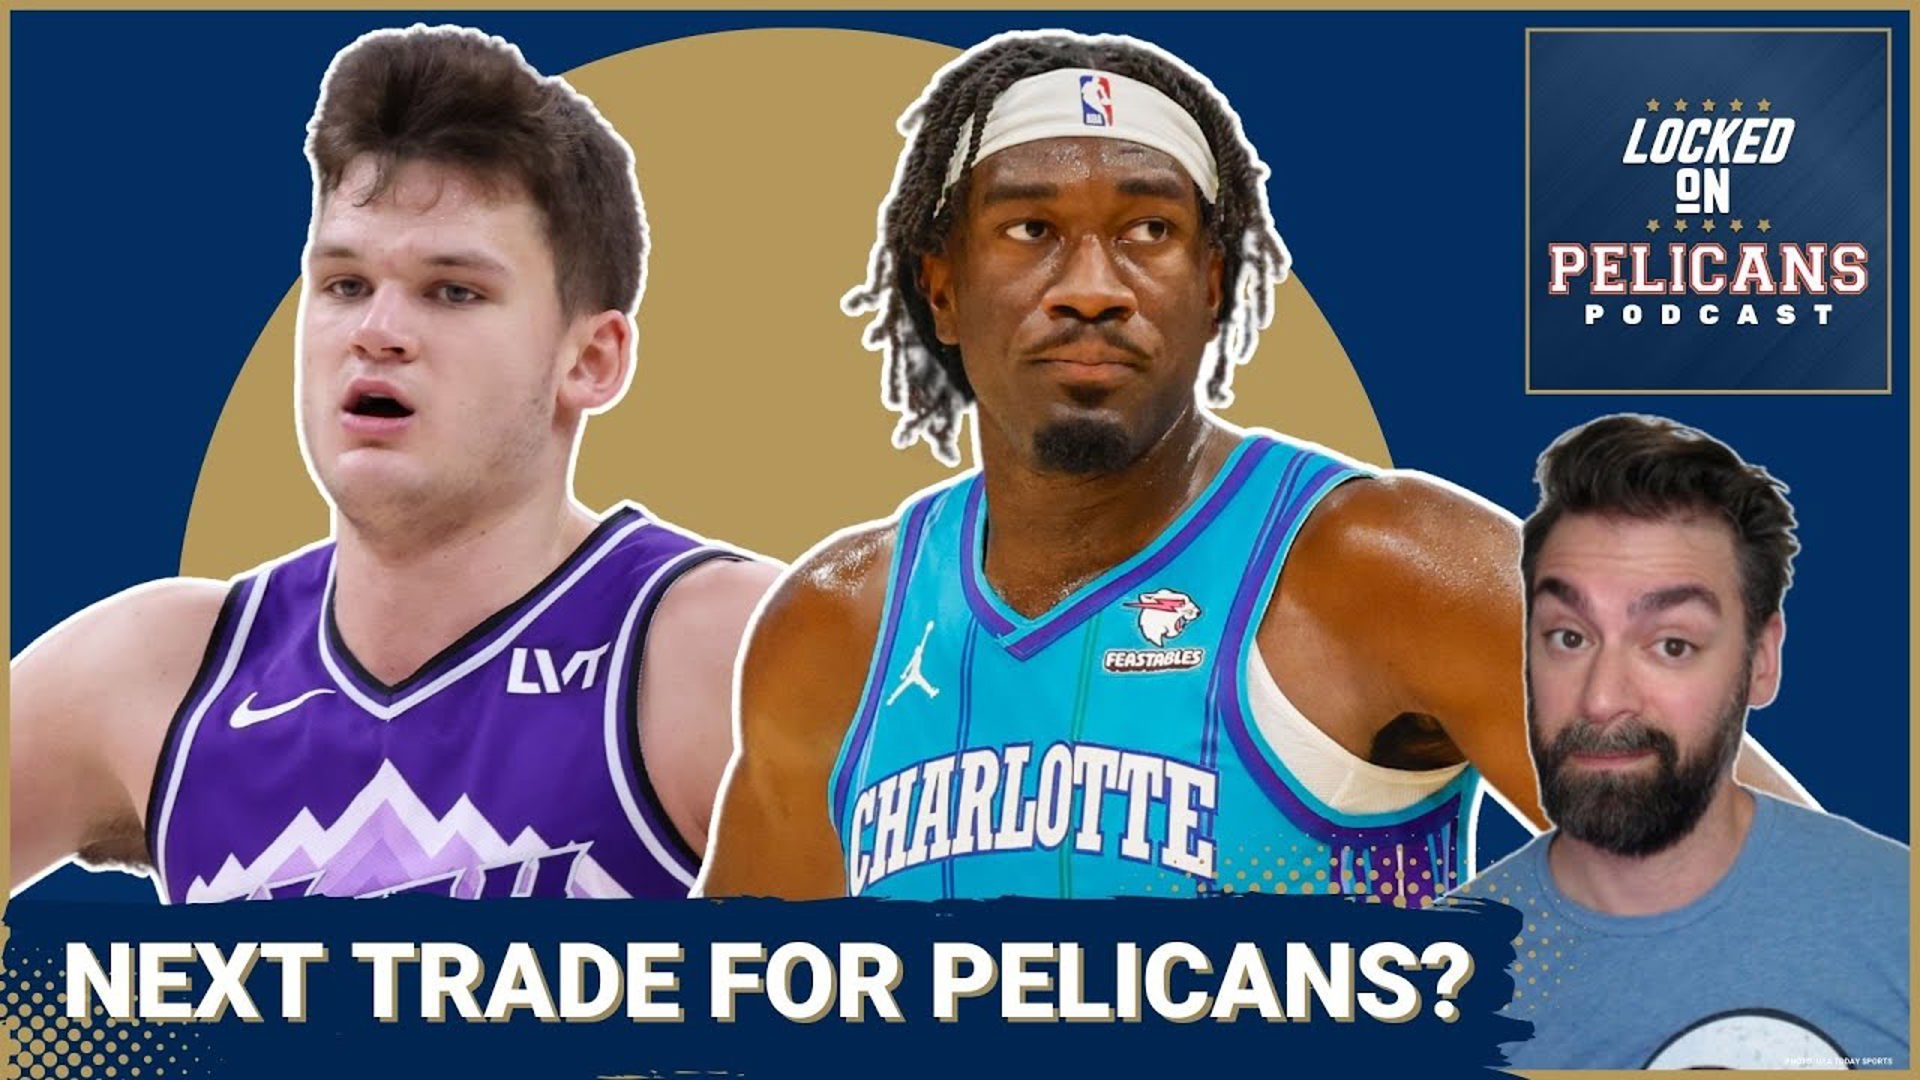 The New Orleans Pelicans still need a starting center alongside Zion Williamson and the rumors are that Walker Kessler is available for trade.